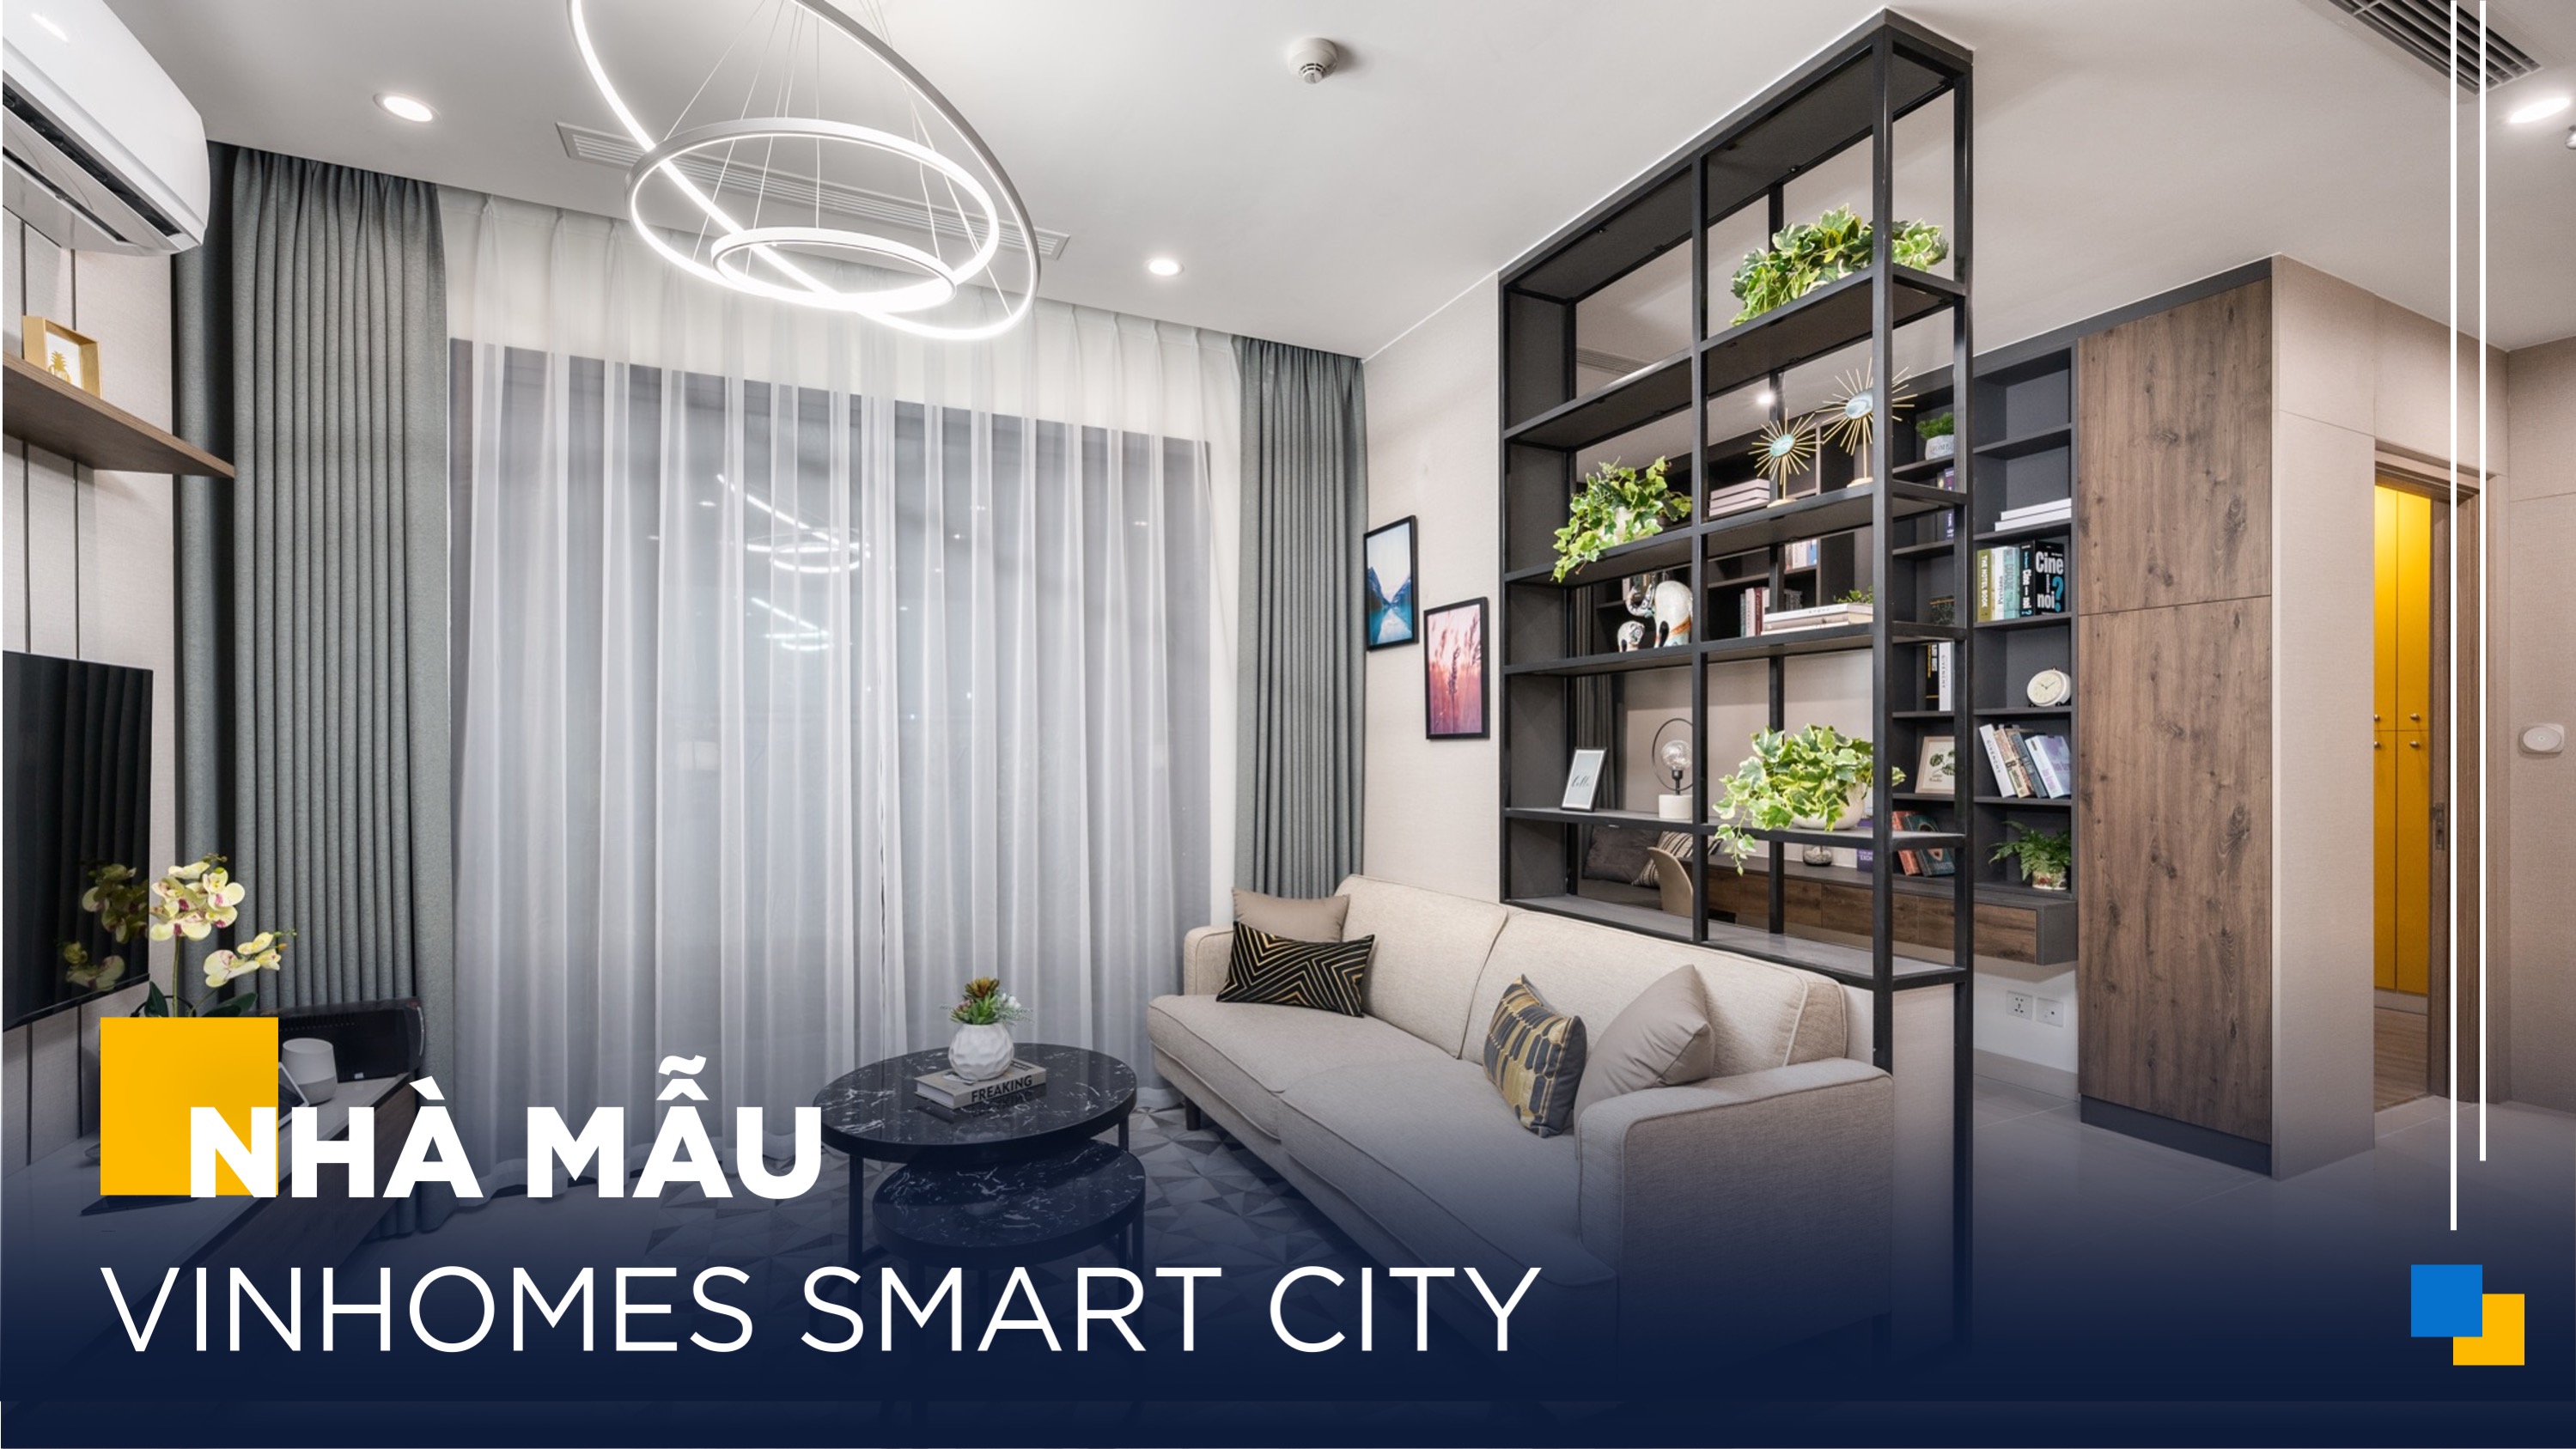 An Cuong Wood | Dream Home - 2 Bedroom Apartment (+1)